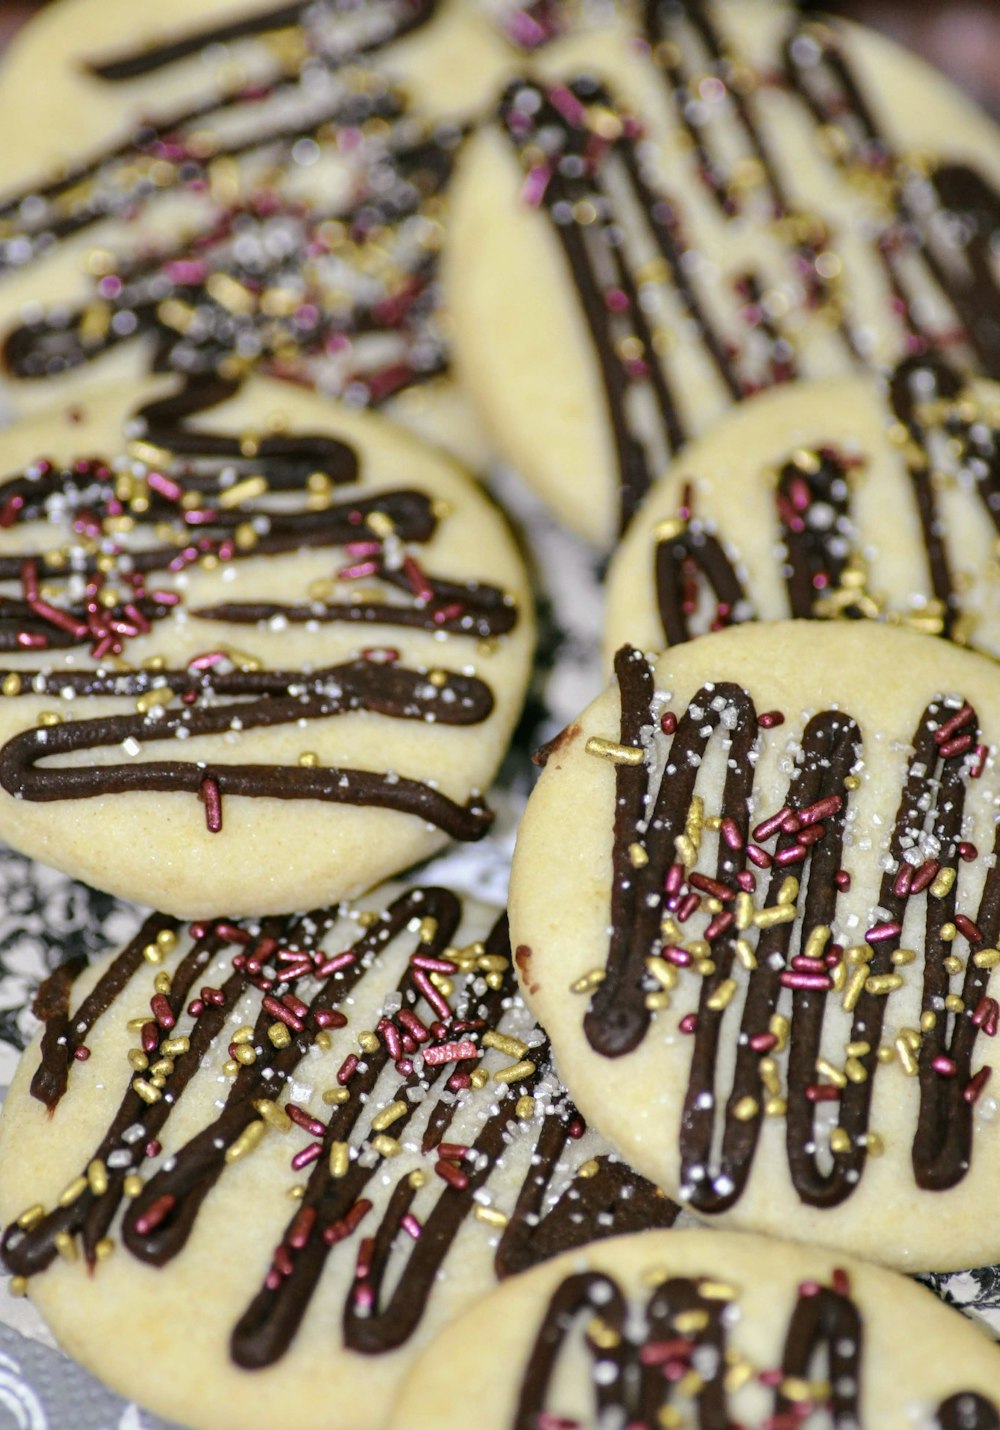 a close up of a plate of cookies with chocolate and sprinkles